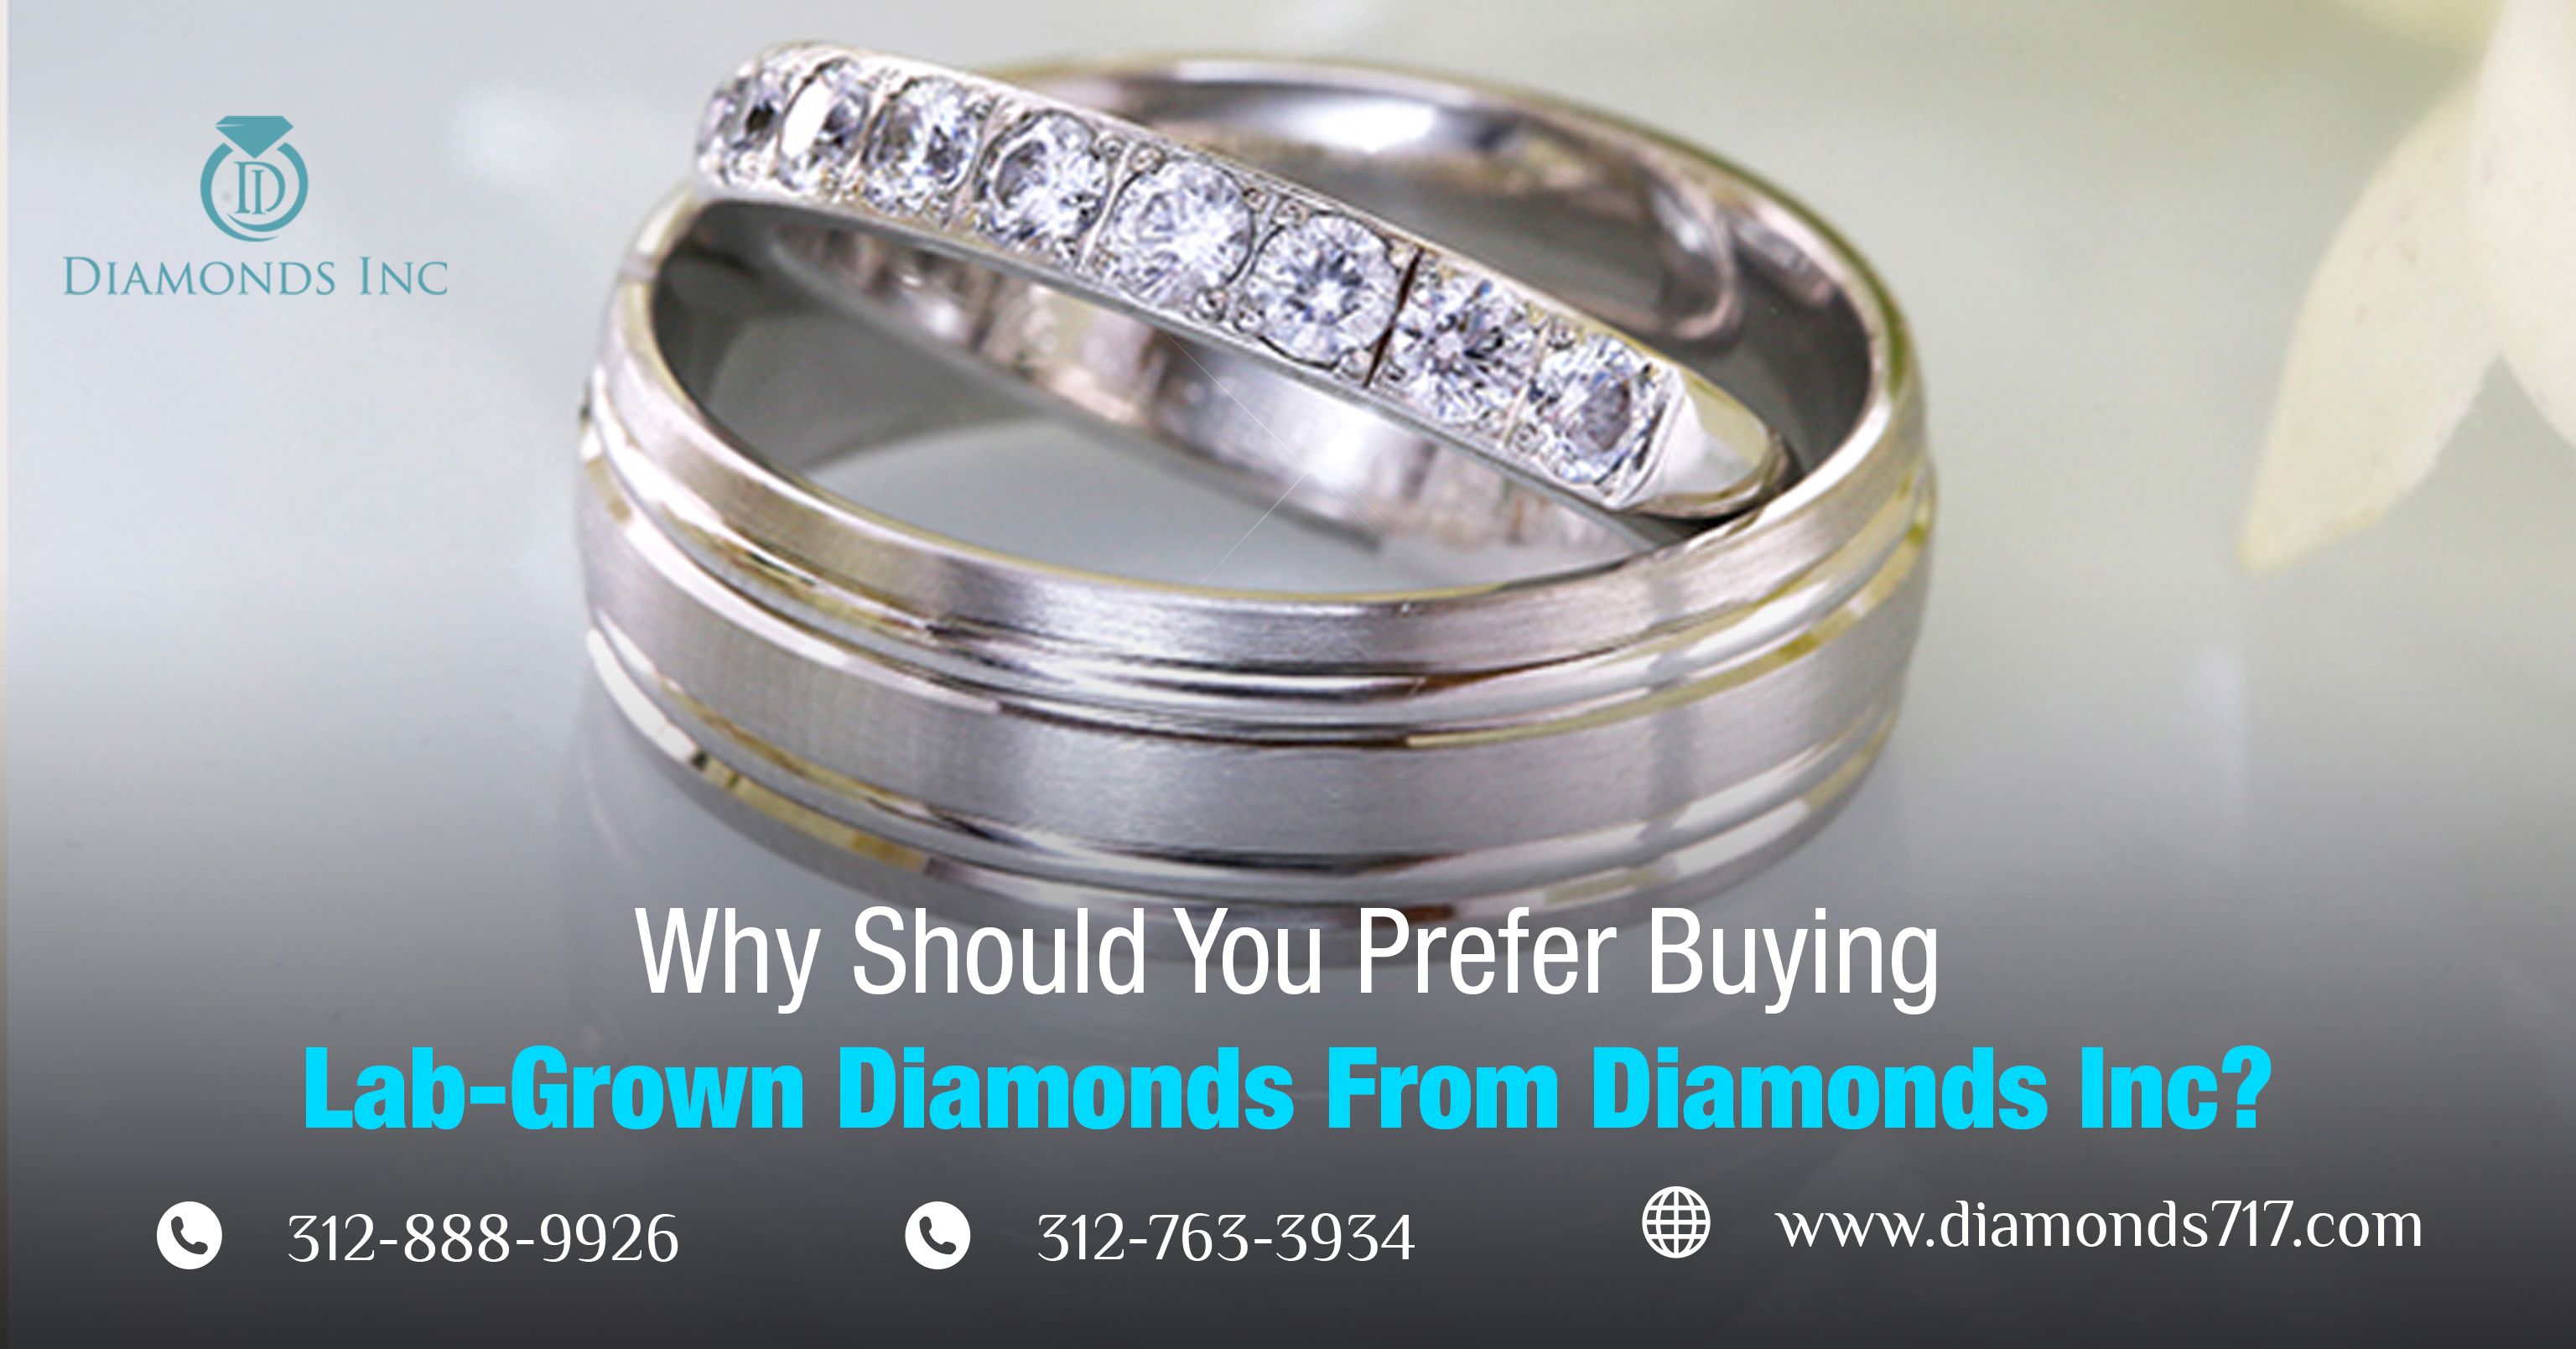 Why Should You Prefer Buying Lab-grown Diamonds From Diamonds Inc?